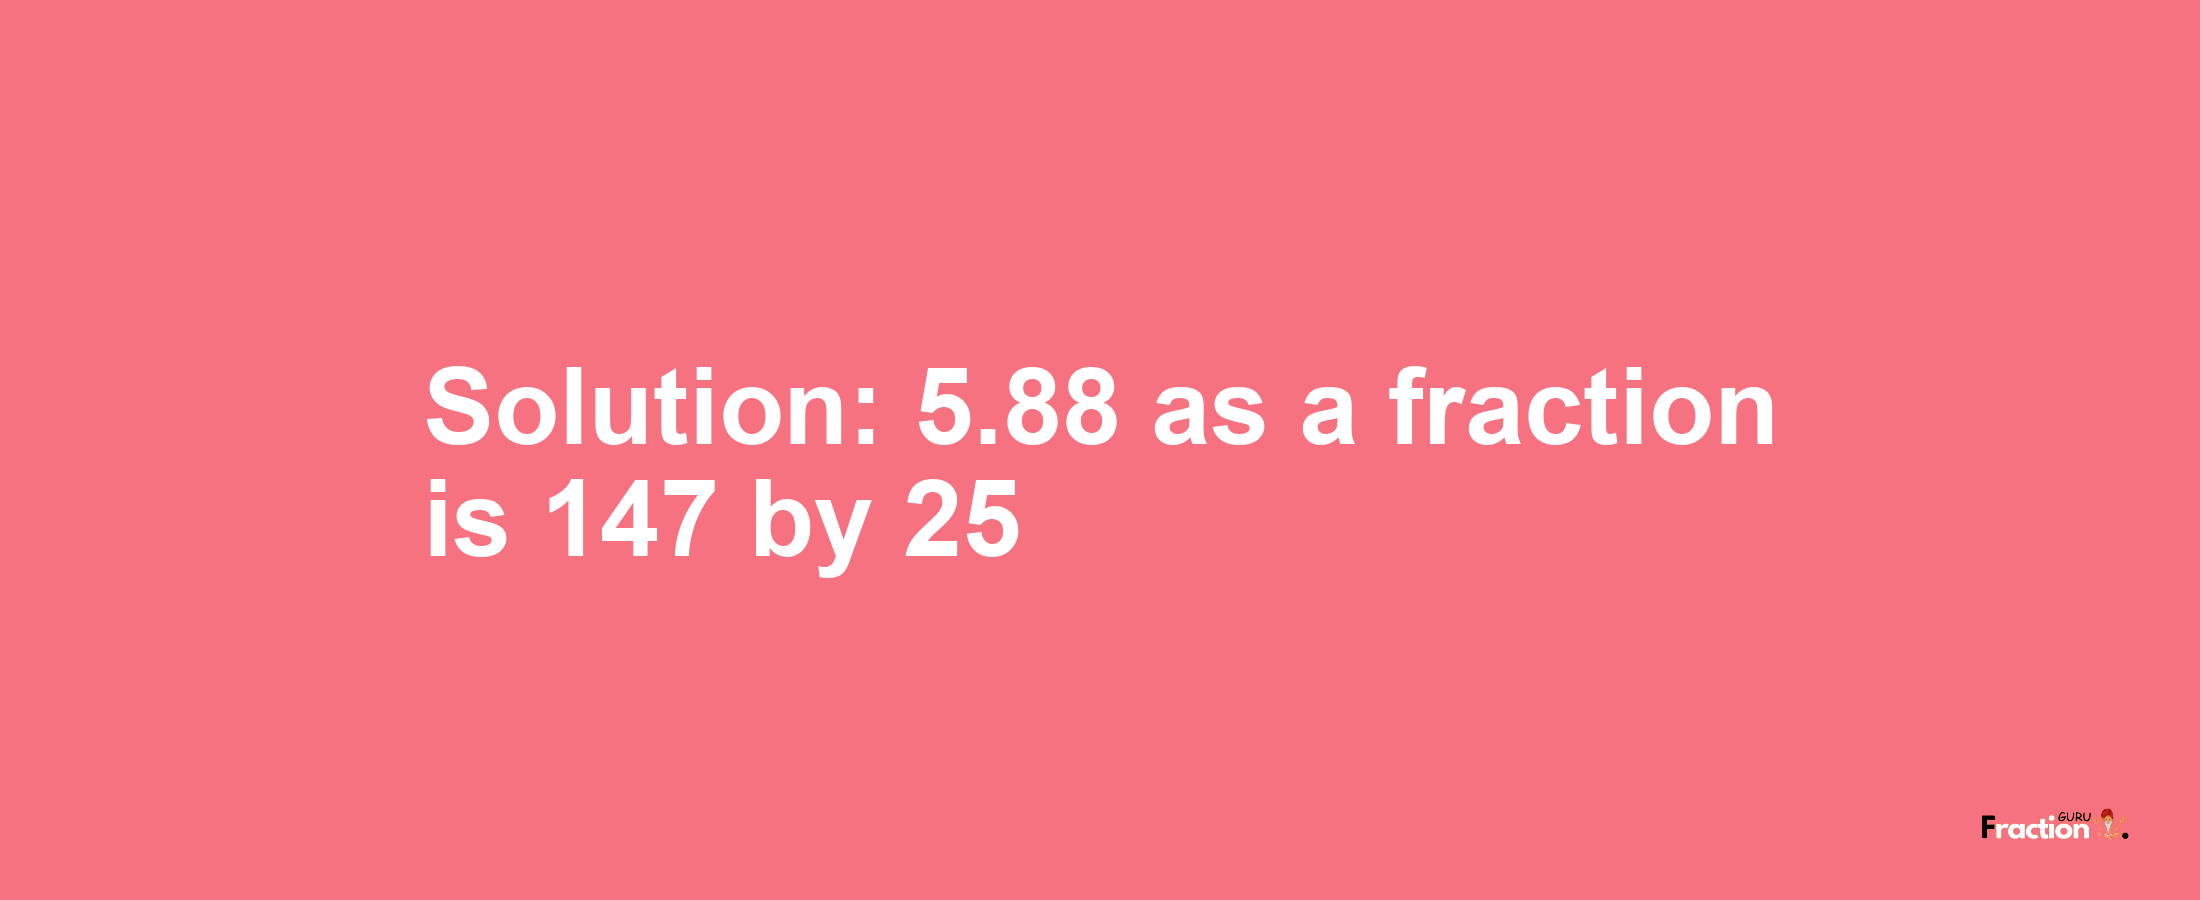 Solution:5.88 as a fraction is 147/25